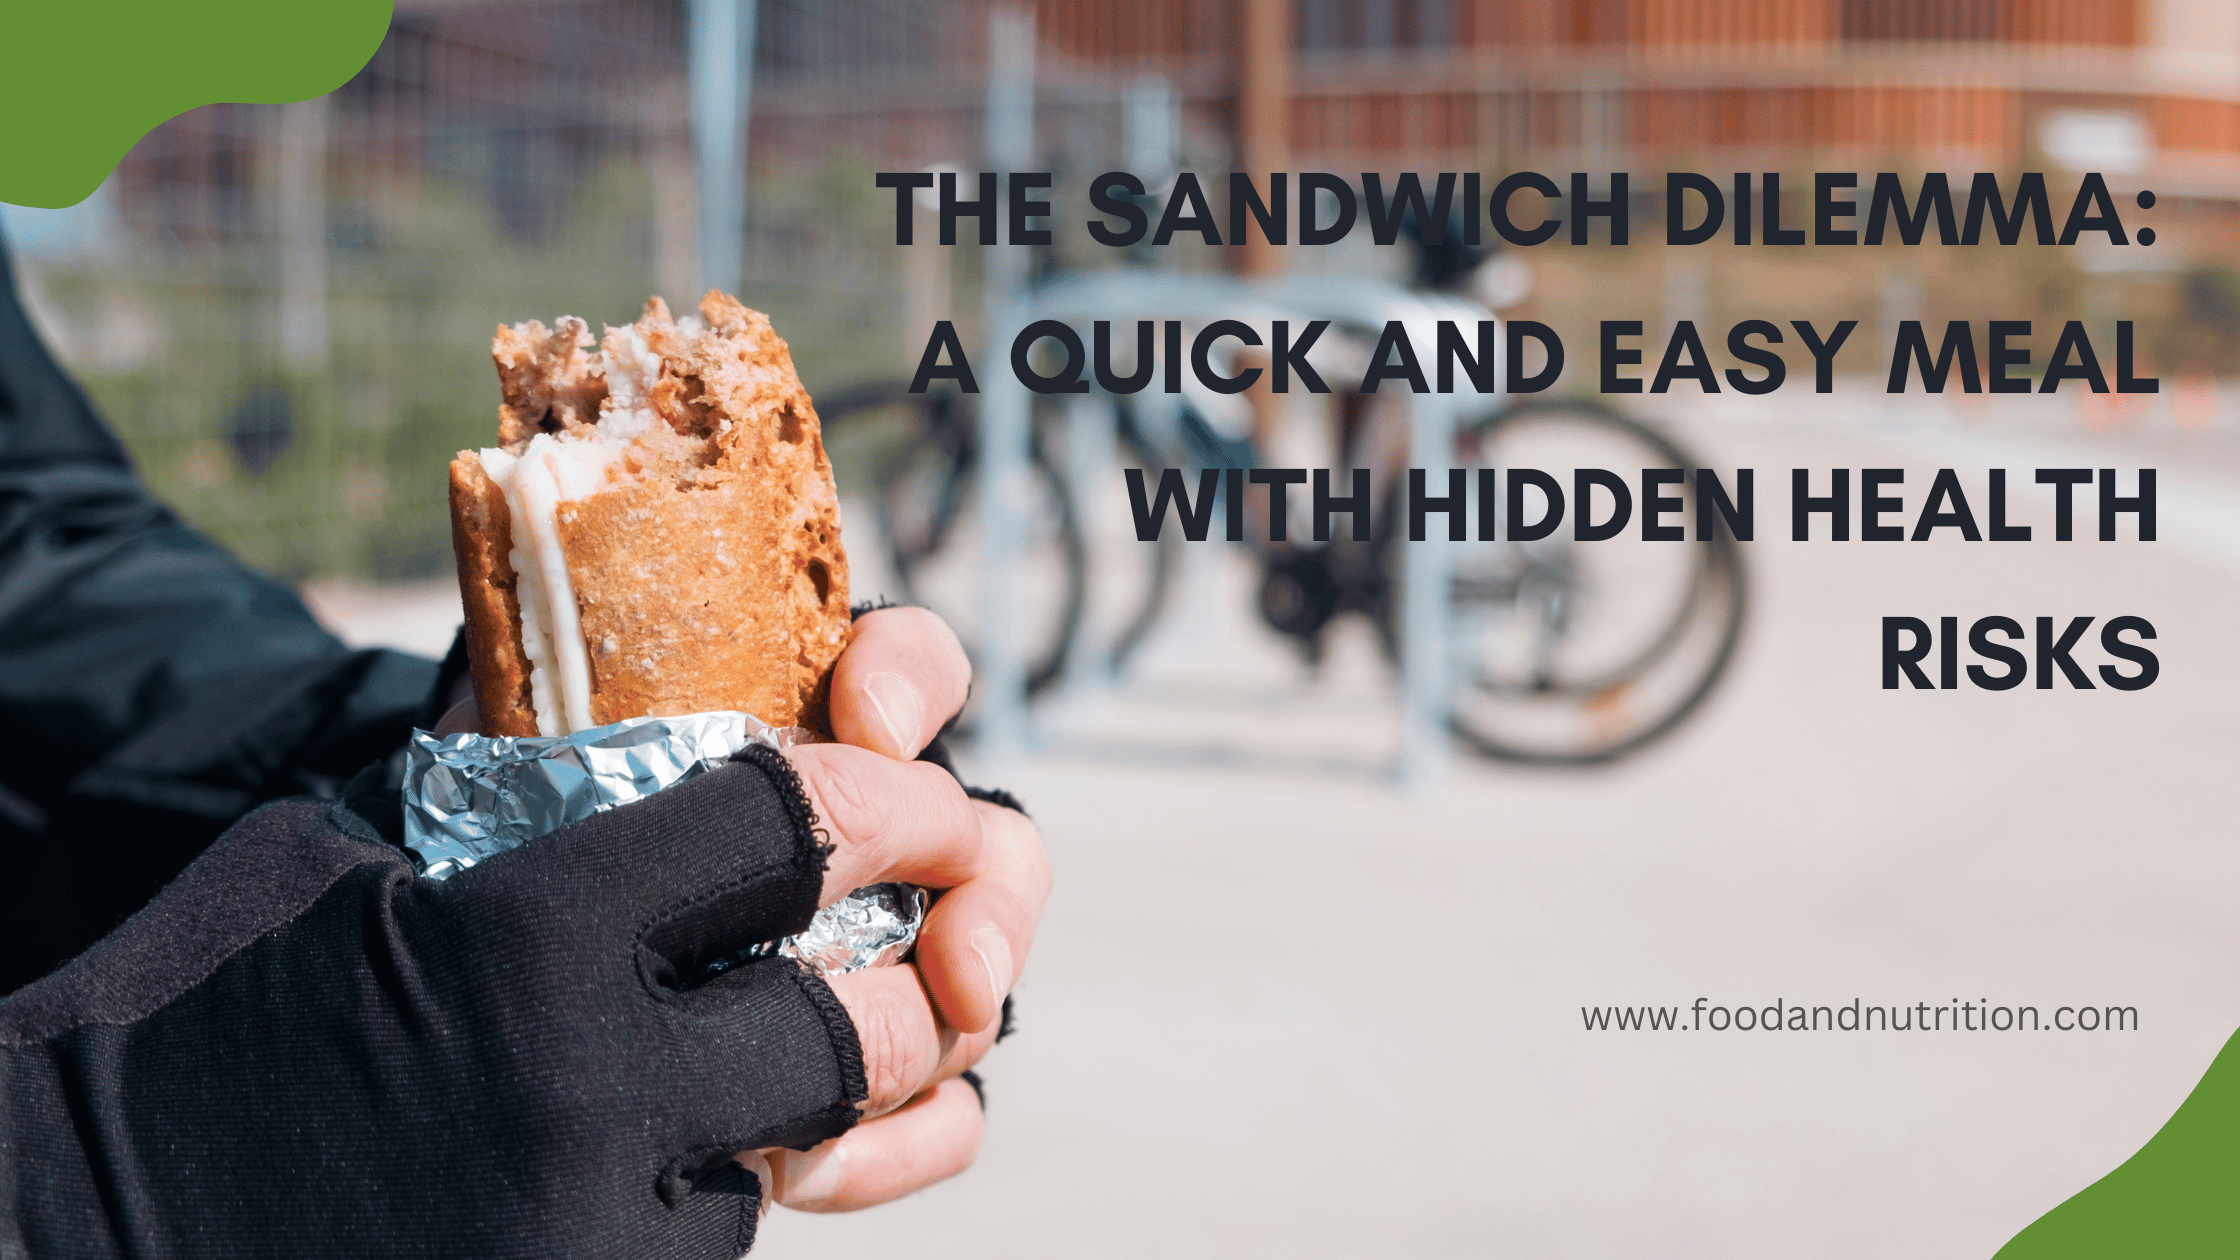 The Sandwich Dilemma: A Quick and Easy Meal with Hidden Health Risks